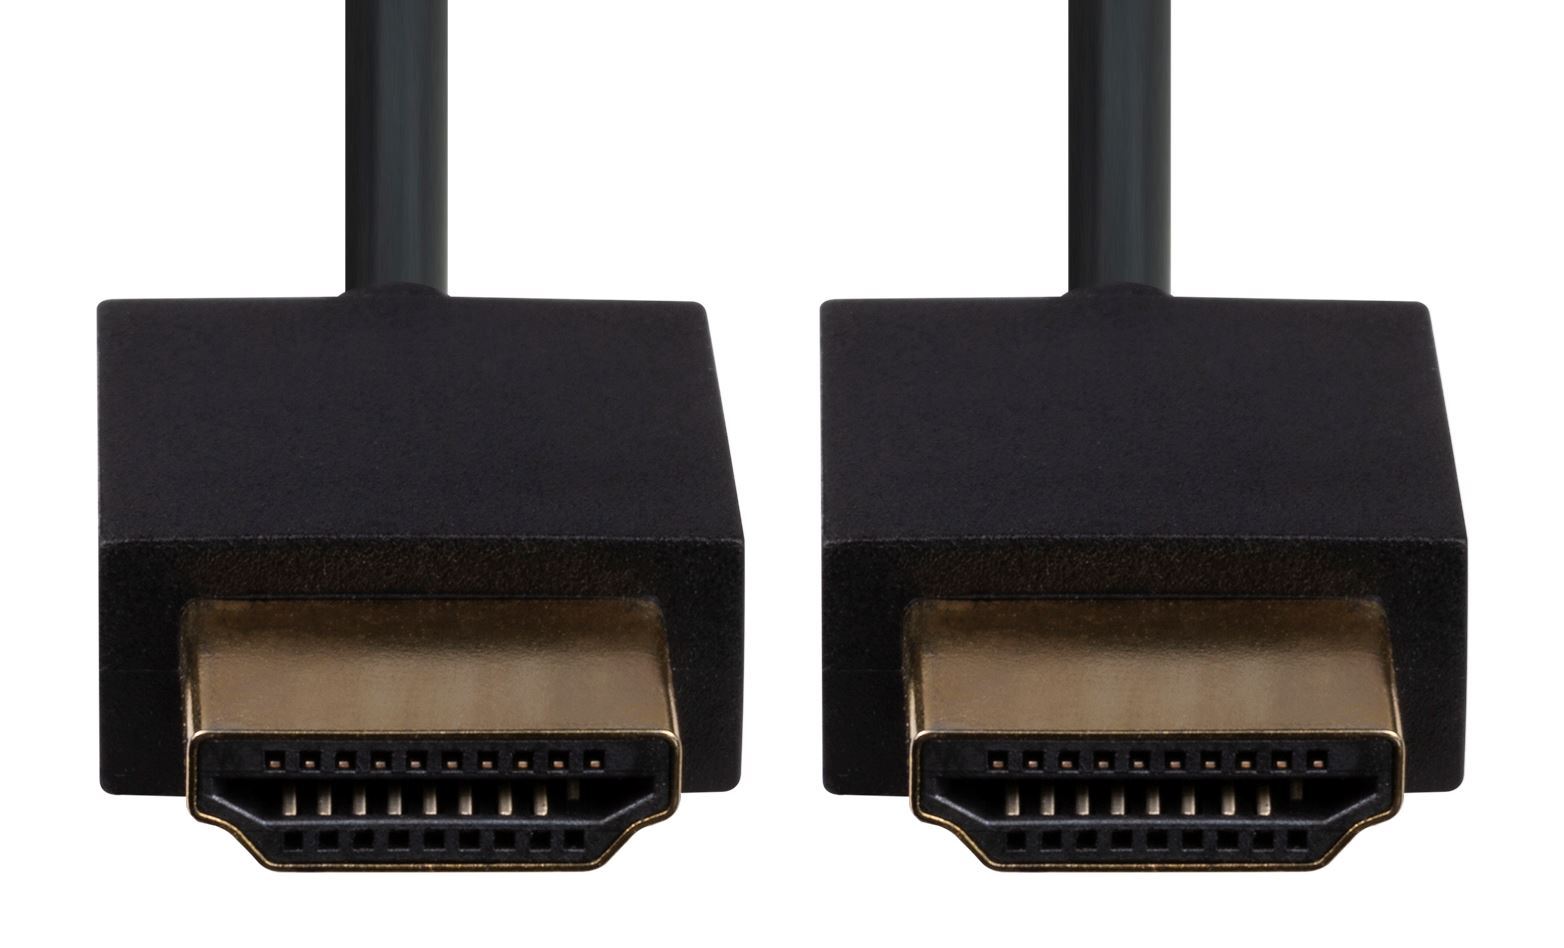 DYNAMIX_2M_HDMI_BLACK_Nano_High_Speed_With_Ethernet_Cable._Designed_for_UHD_Display_up_to_4K2K@60Hz._Slimline_Robust_Cable._Supports_CEC_2.0,_3D,_&_ARC._Supports_Up_to_32_Audio_Channels. 682